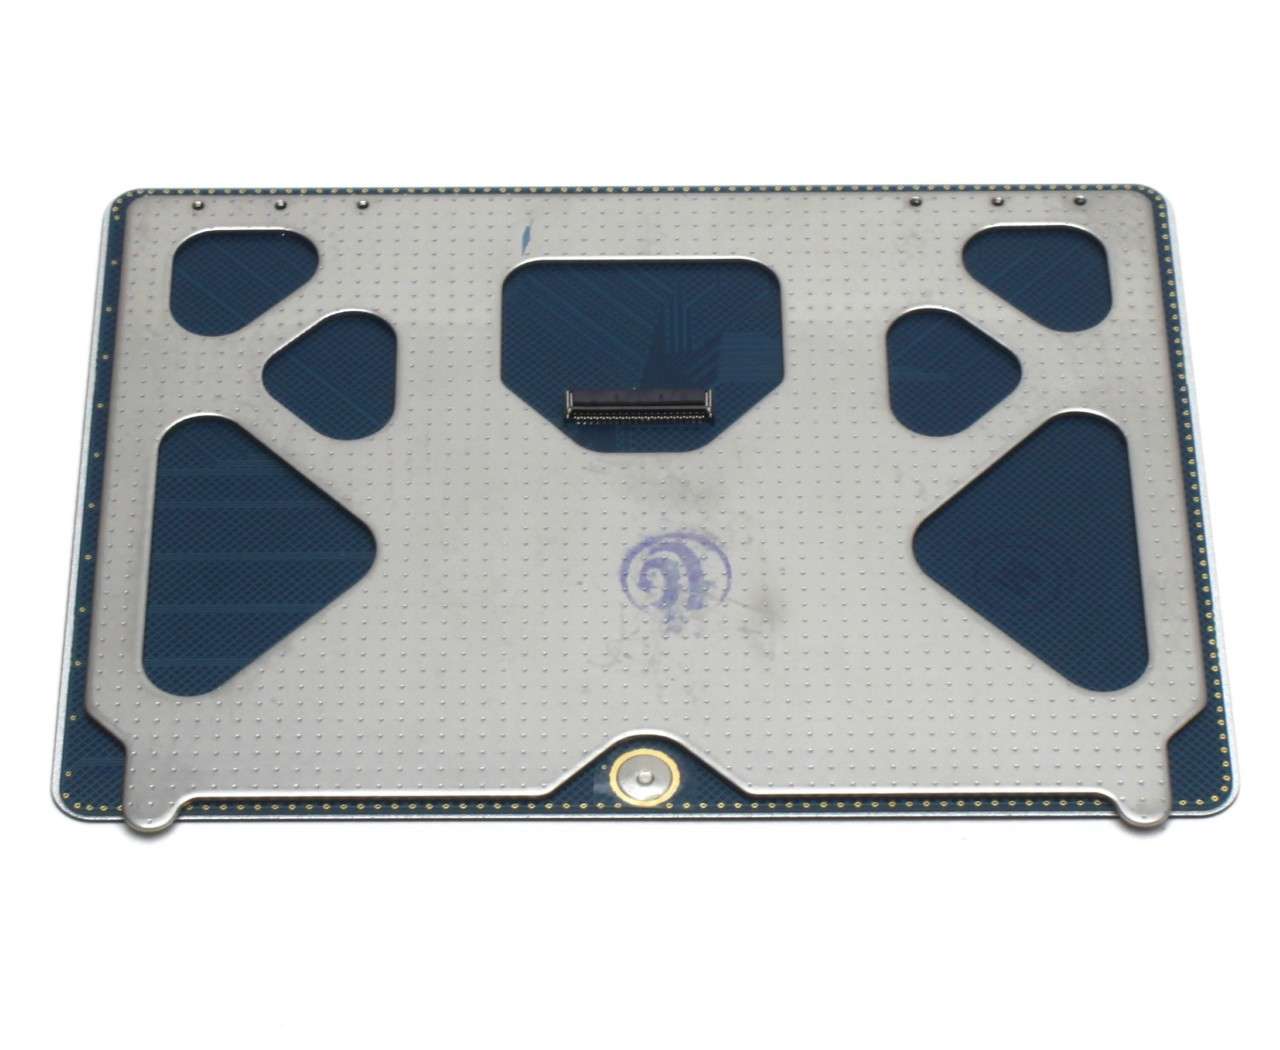 Touchpad Apple Macbook Pro Unibody 13 A1278 Mid 2009 Trackpad image